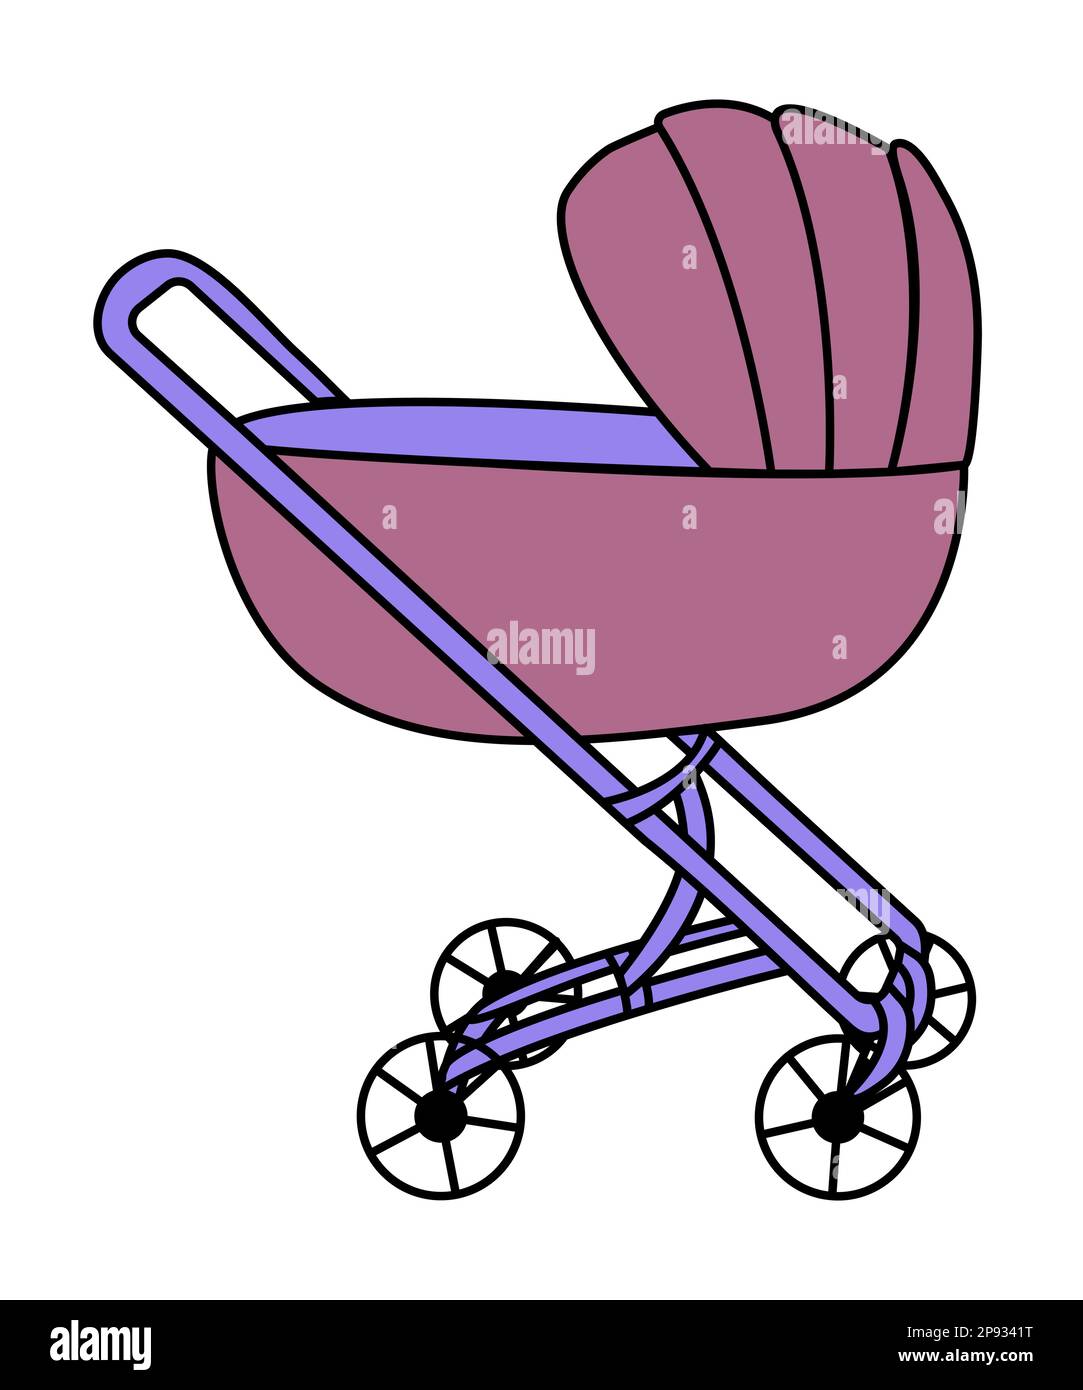 Baby stroller, cute colorful doodle Stock Vector